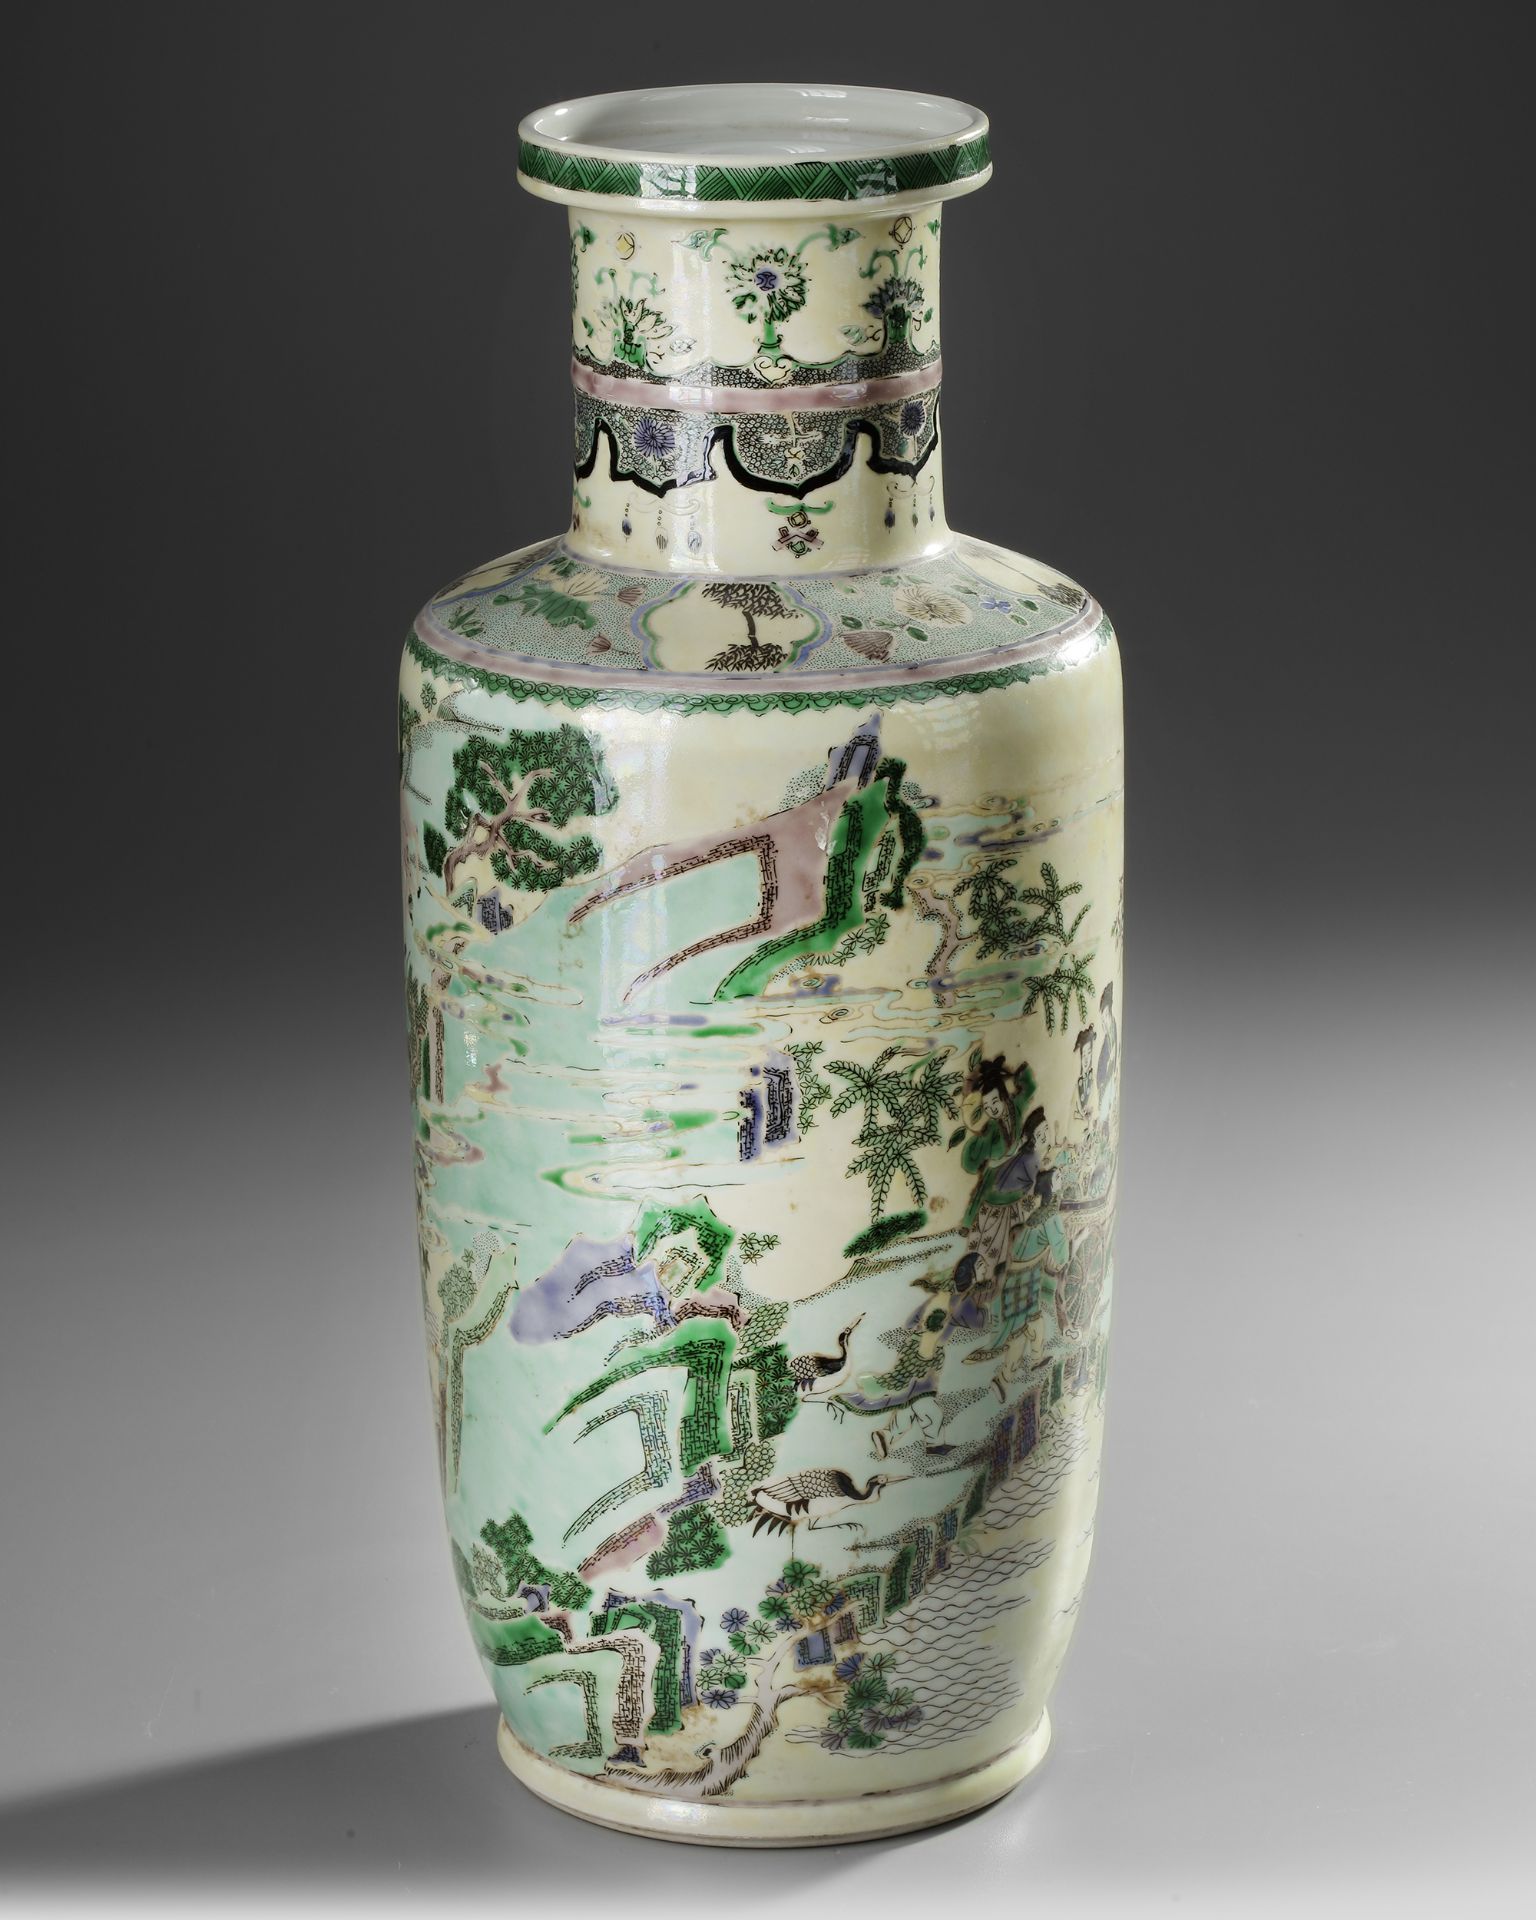 A CHINESE FAMILLE VERTE ROULEAU VASE, QING DYNASTY (1644-1911) - Image 2 of 4